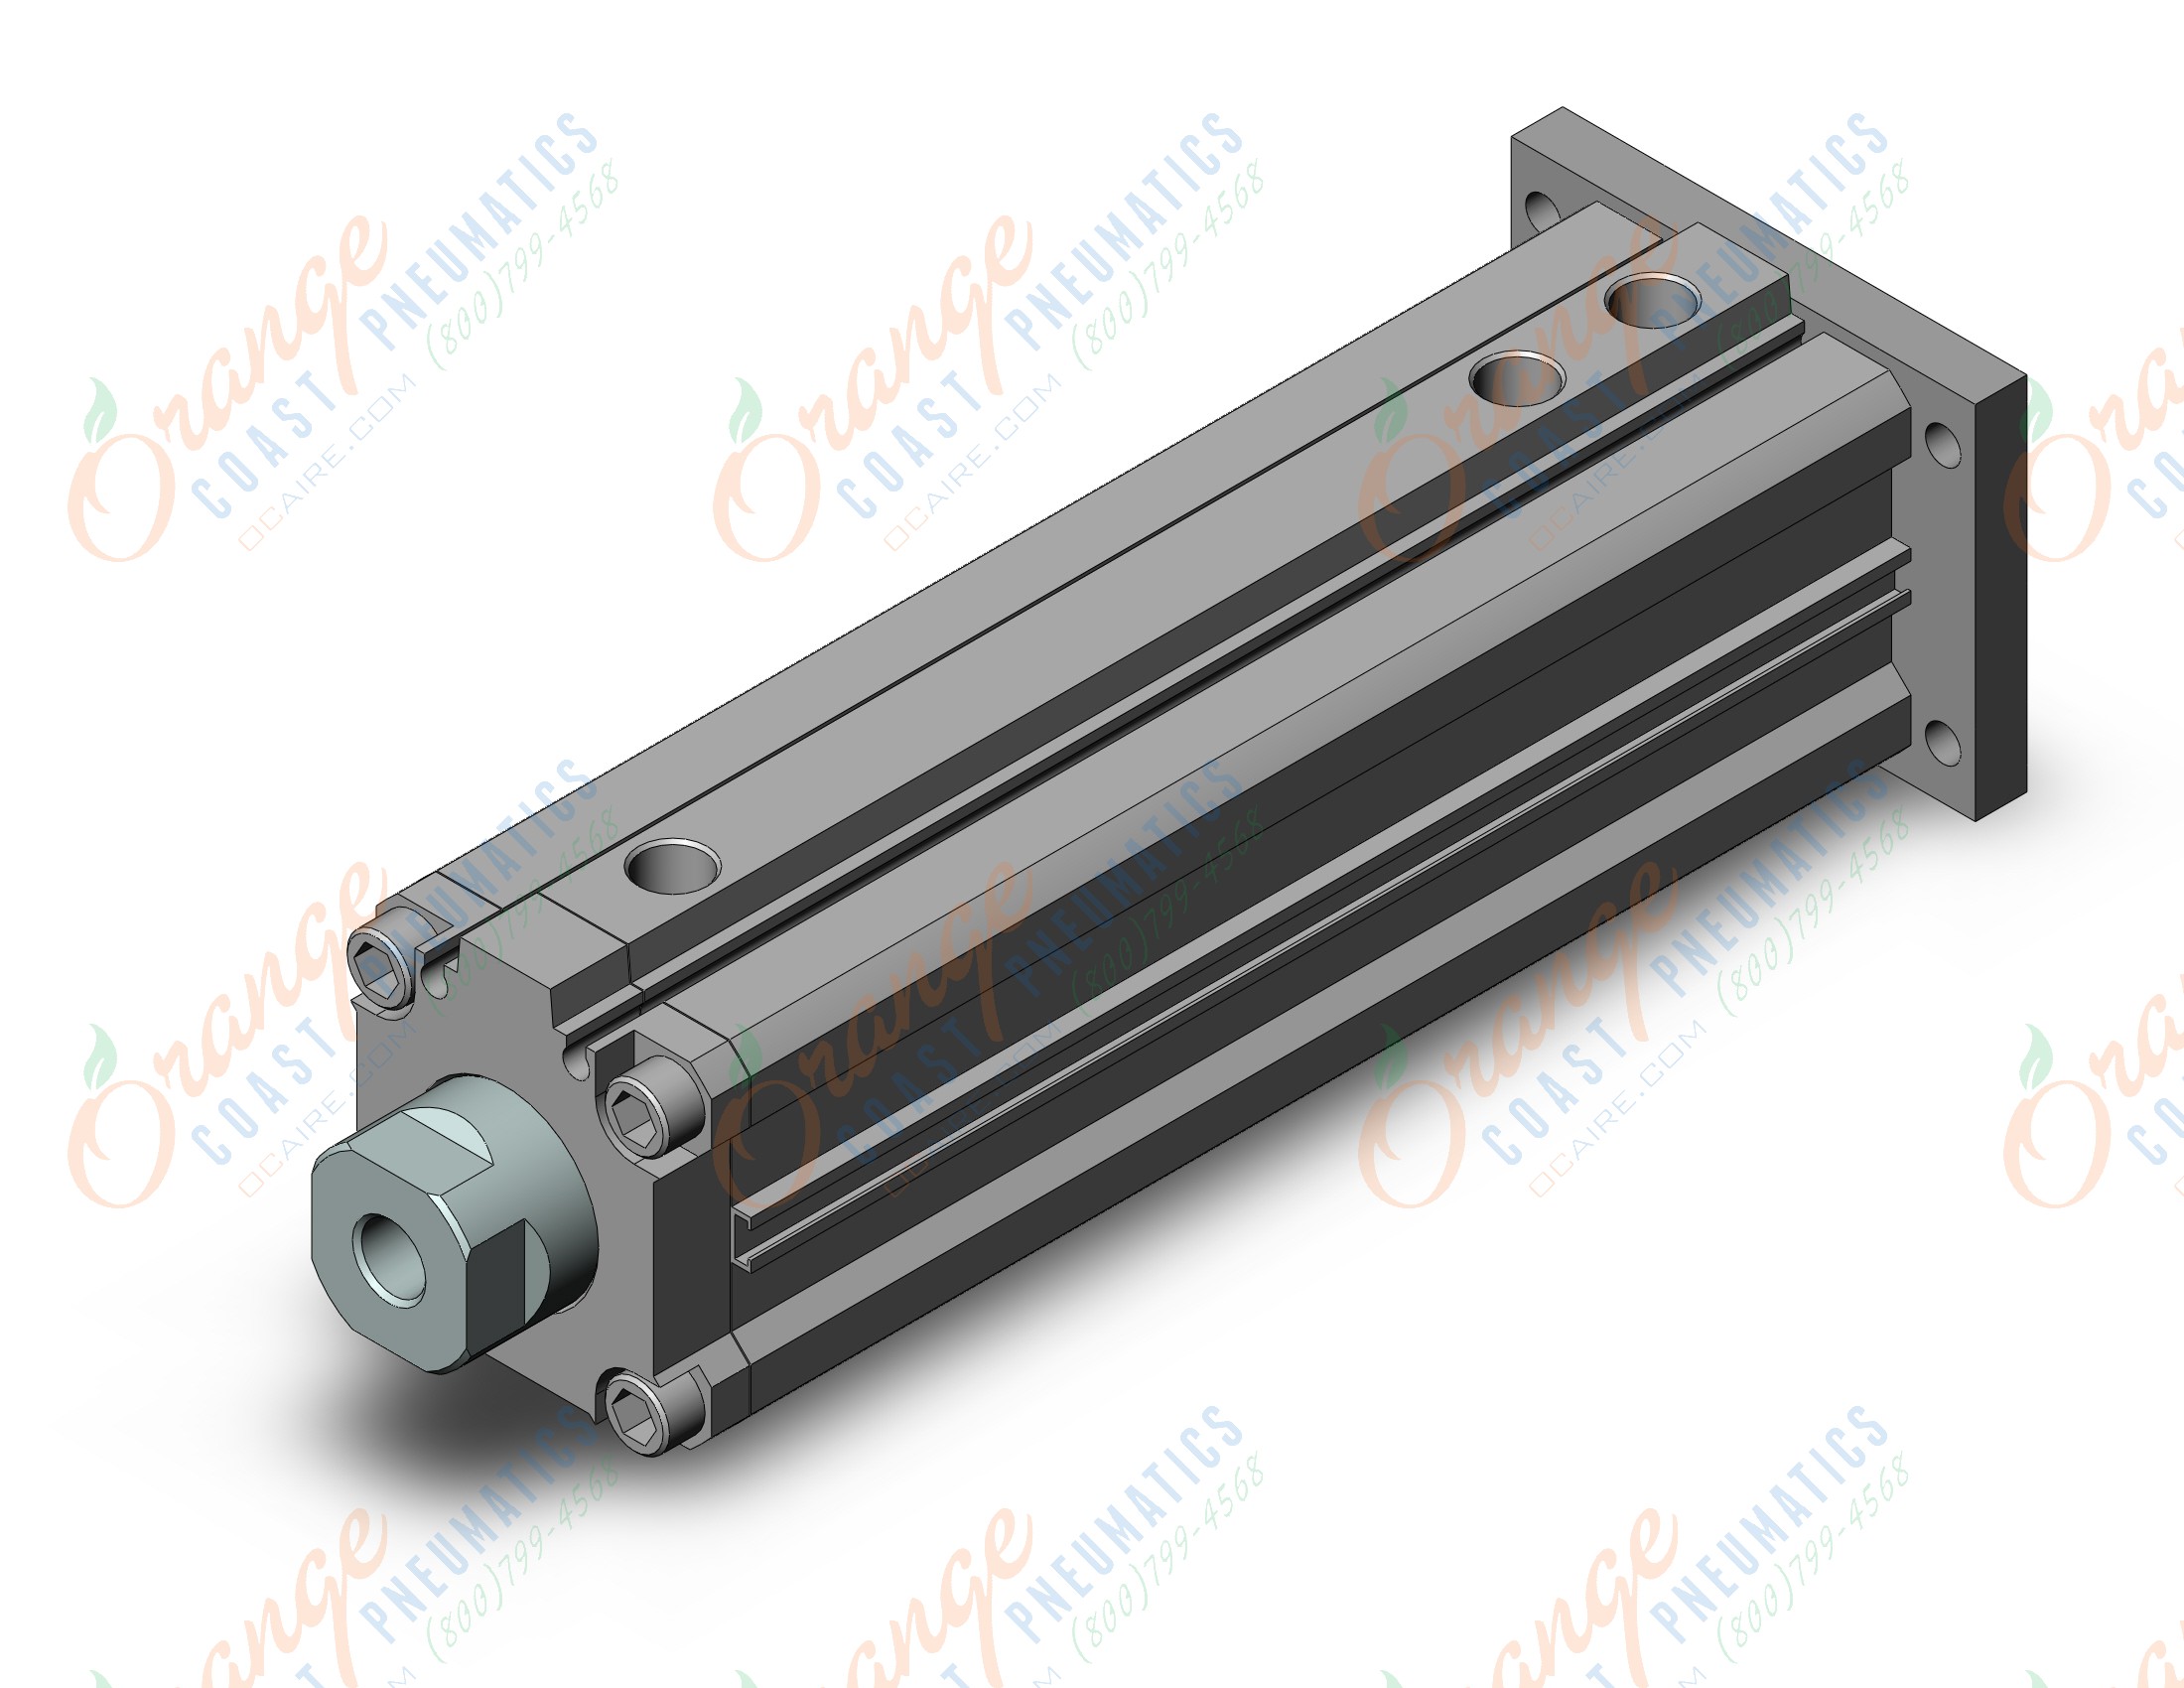 SMC RZQG40TN-100-20 cyl, 3-position, sw capable, RZQ 3-POSITION CYLINDER